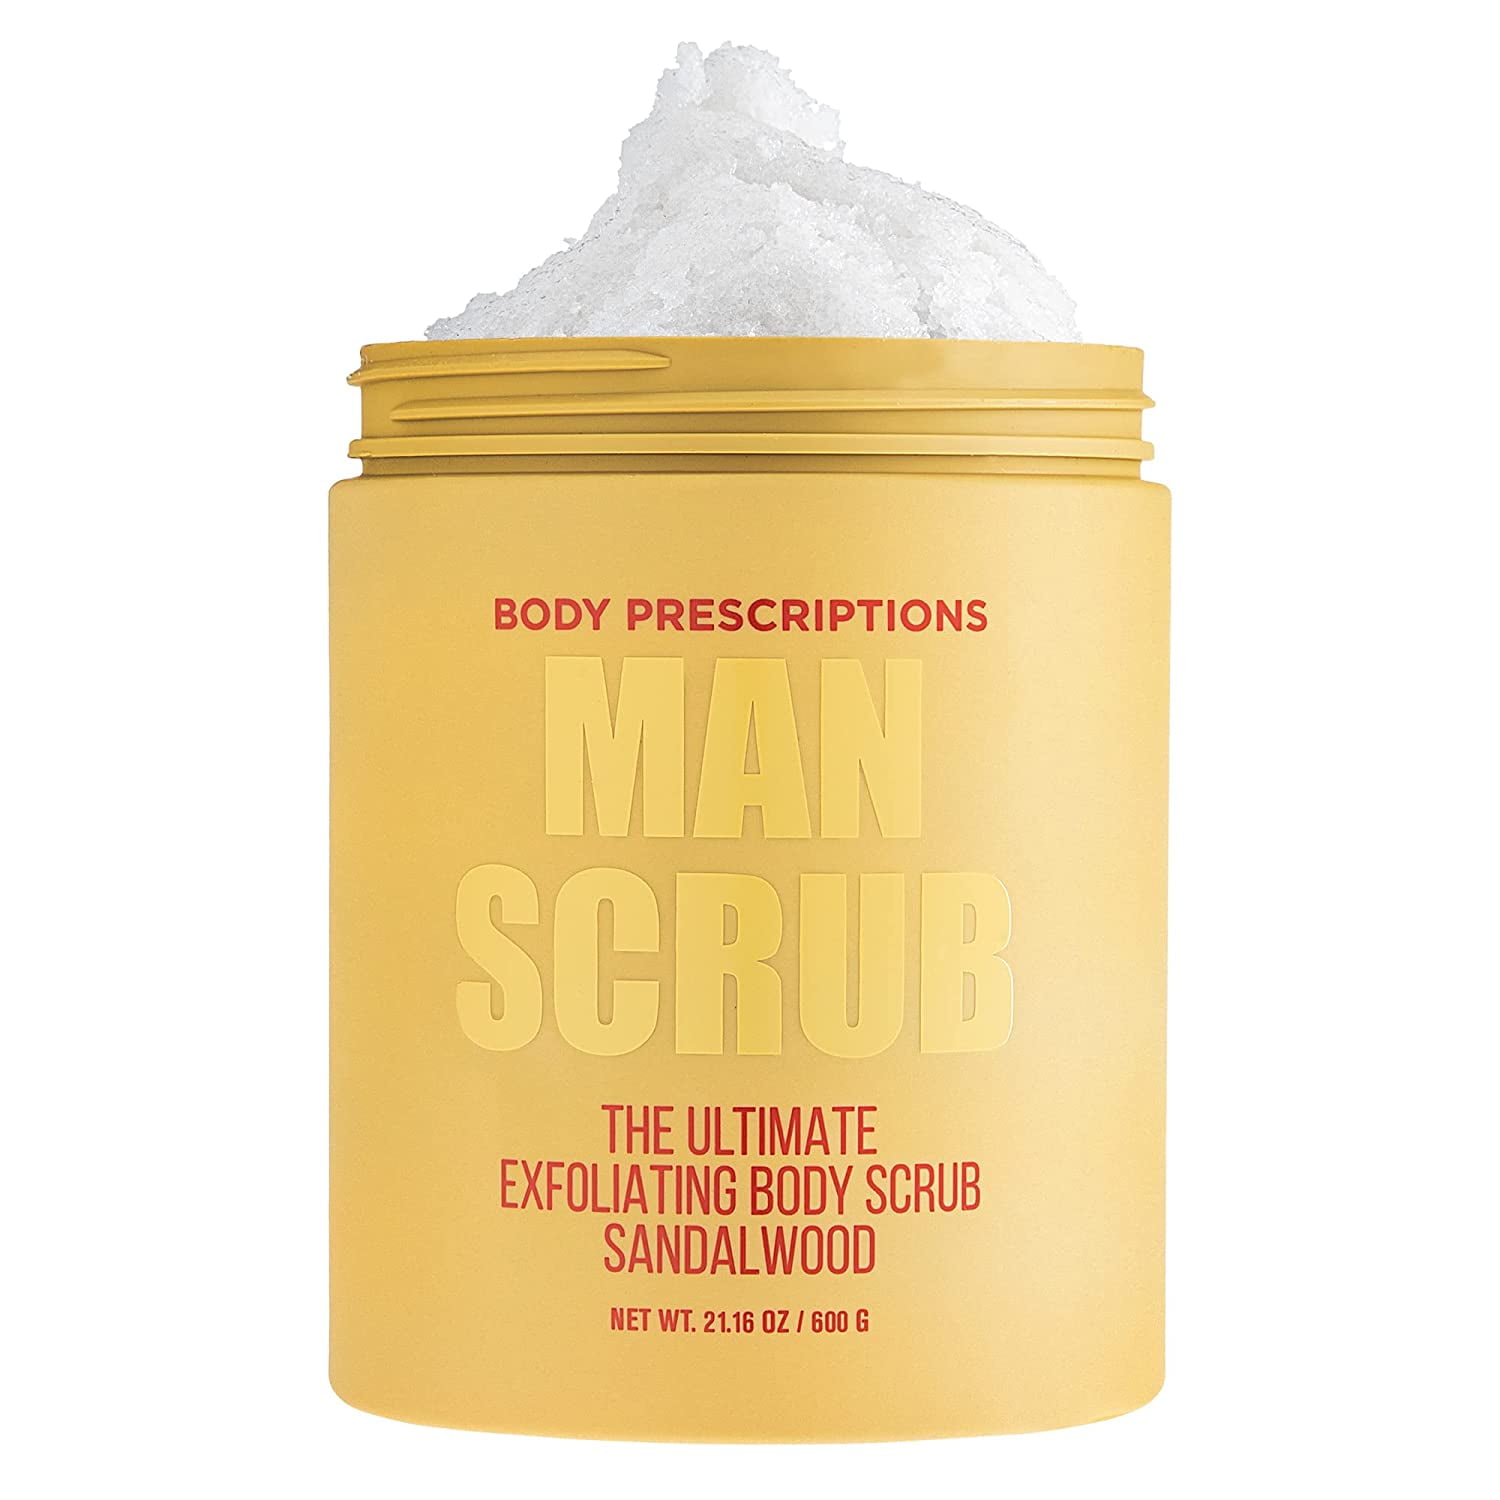 Savers Health and Beauty - 🚨NEW PRODUCT ALERT🚨 Scrub up with